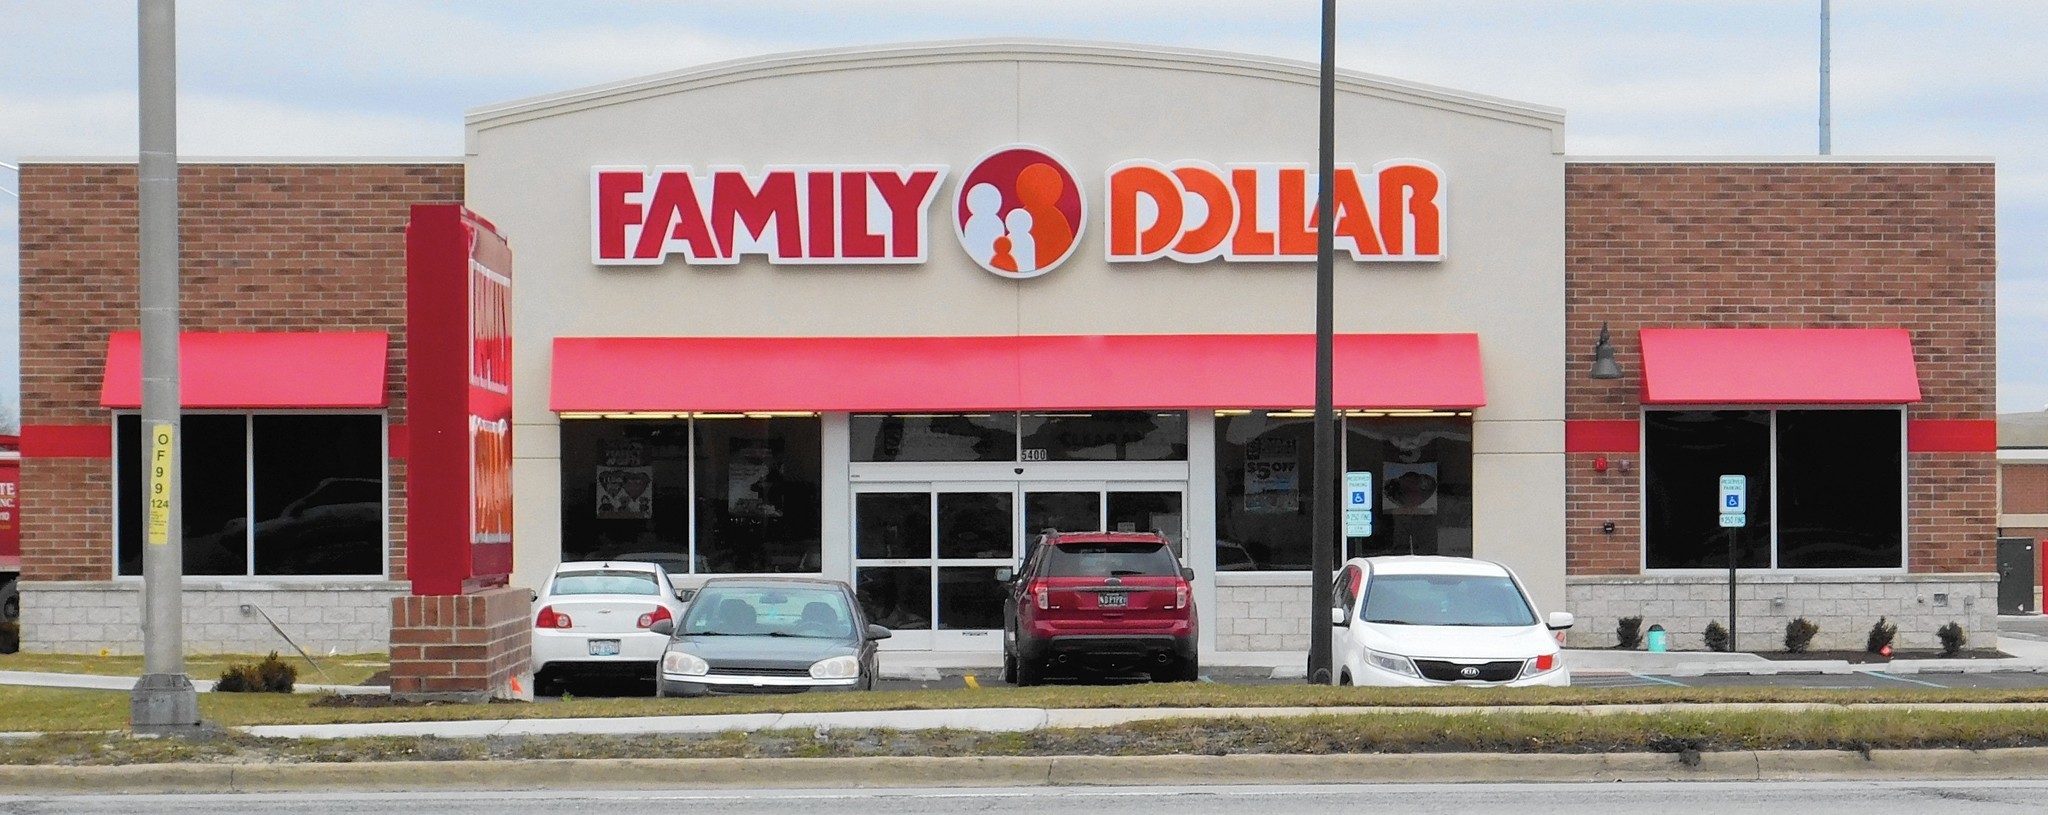 Family Dollar hiring for new Oak Forest location - Daily ...